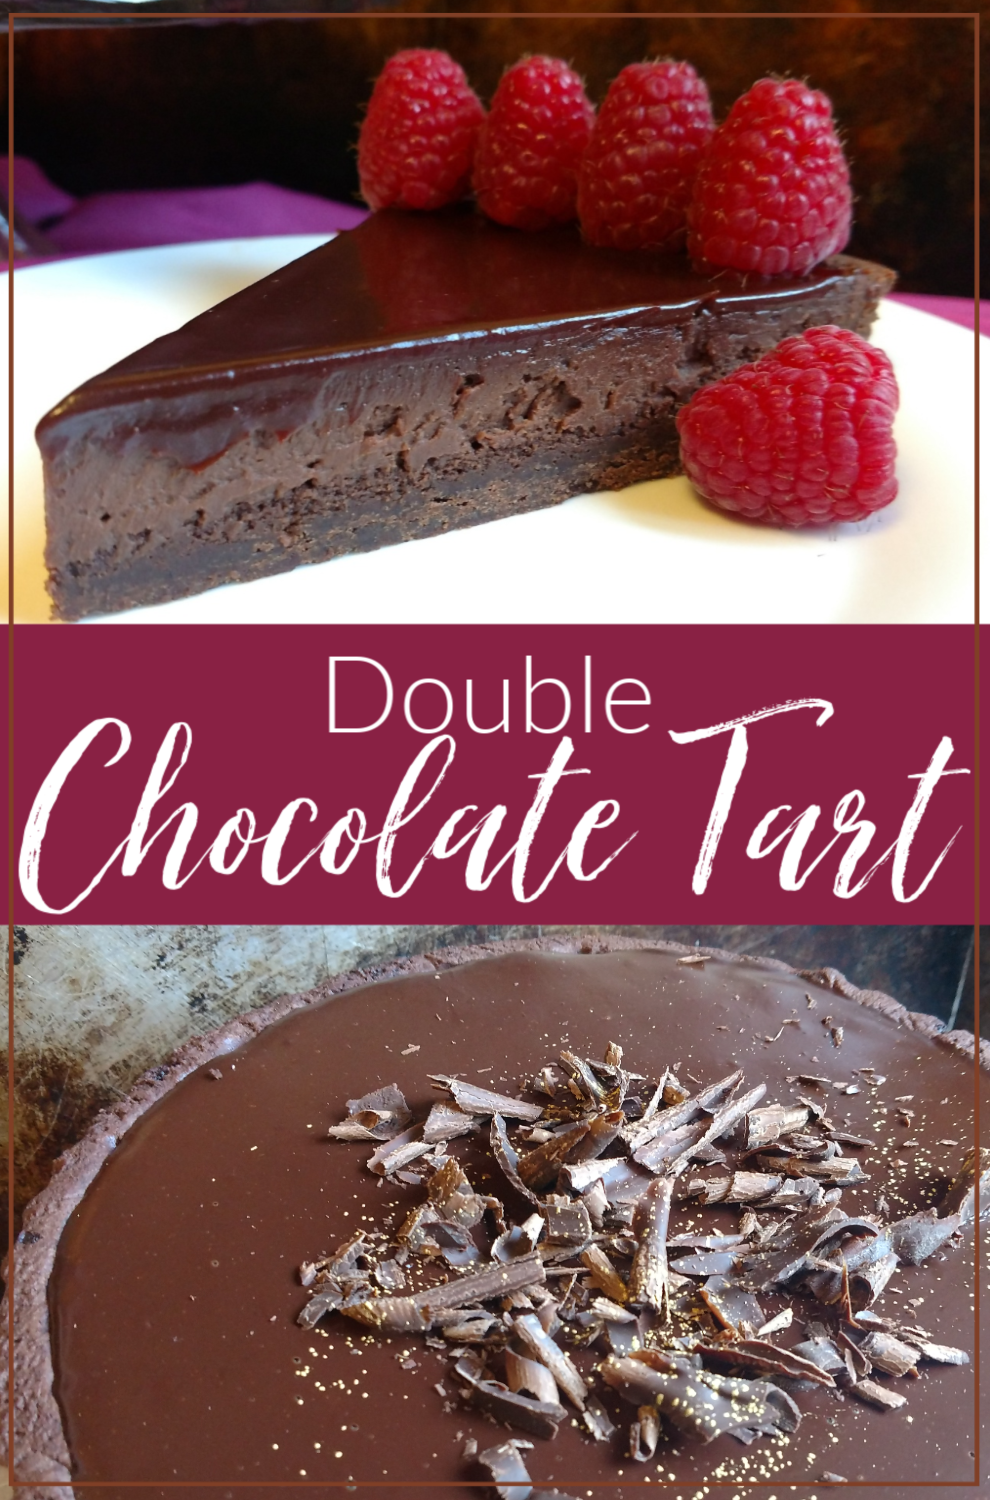 Silky melt in your mouth chocolate truffle filling in a dark chocolate crust, & a decadent ganache glaze. BAM! Your kitchen is now a swanky high-end bakery.